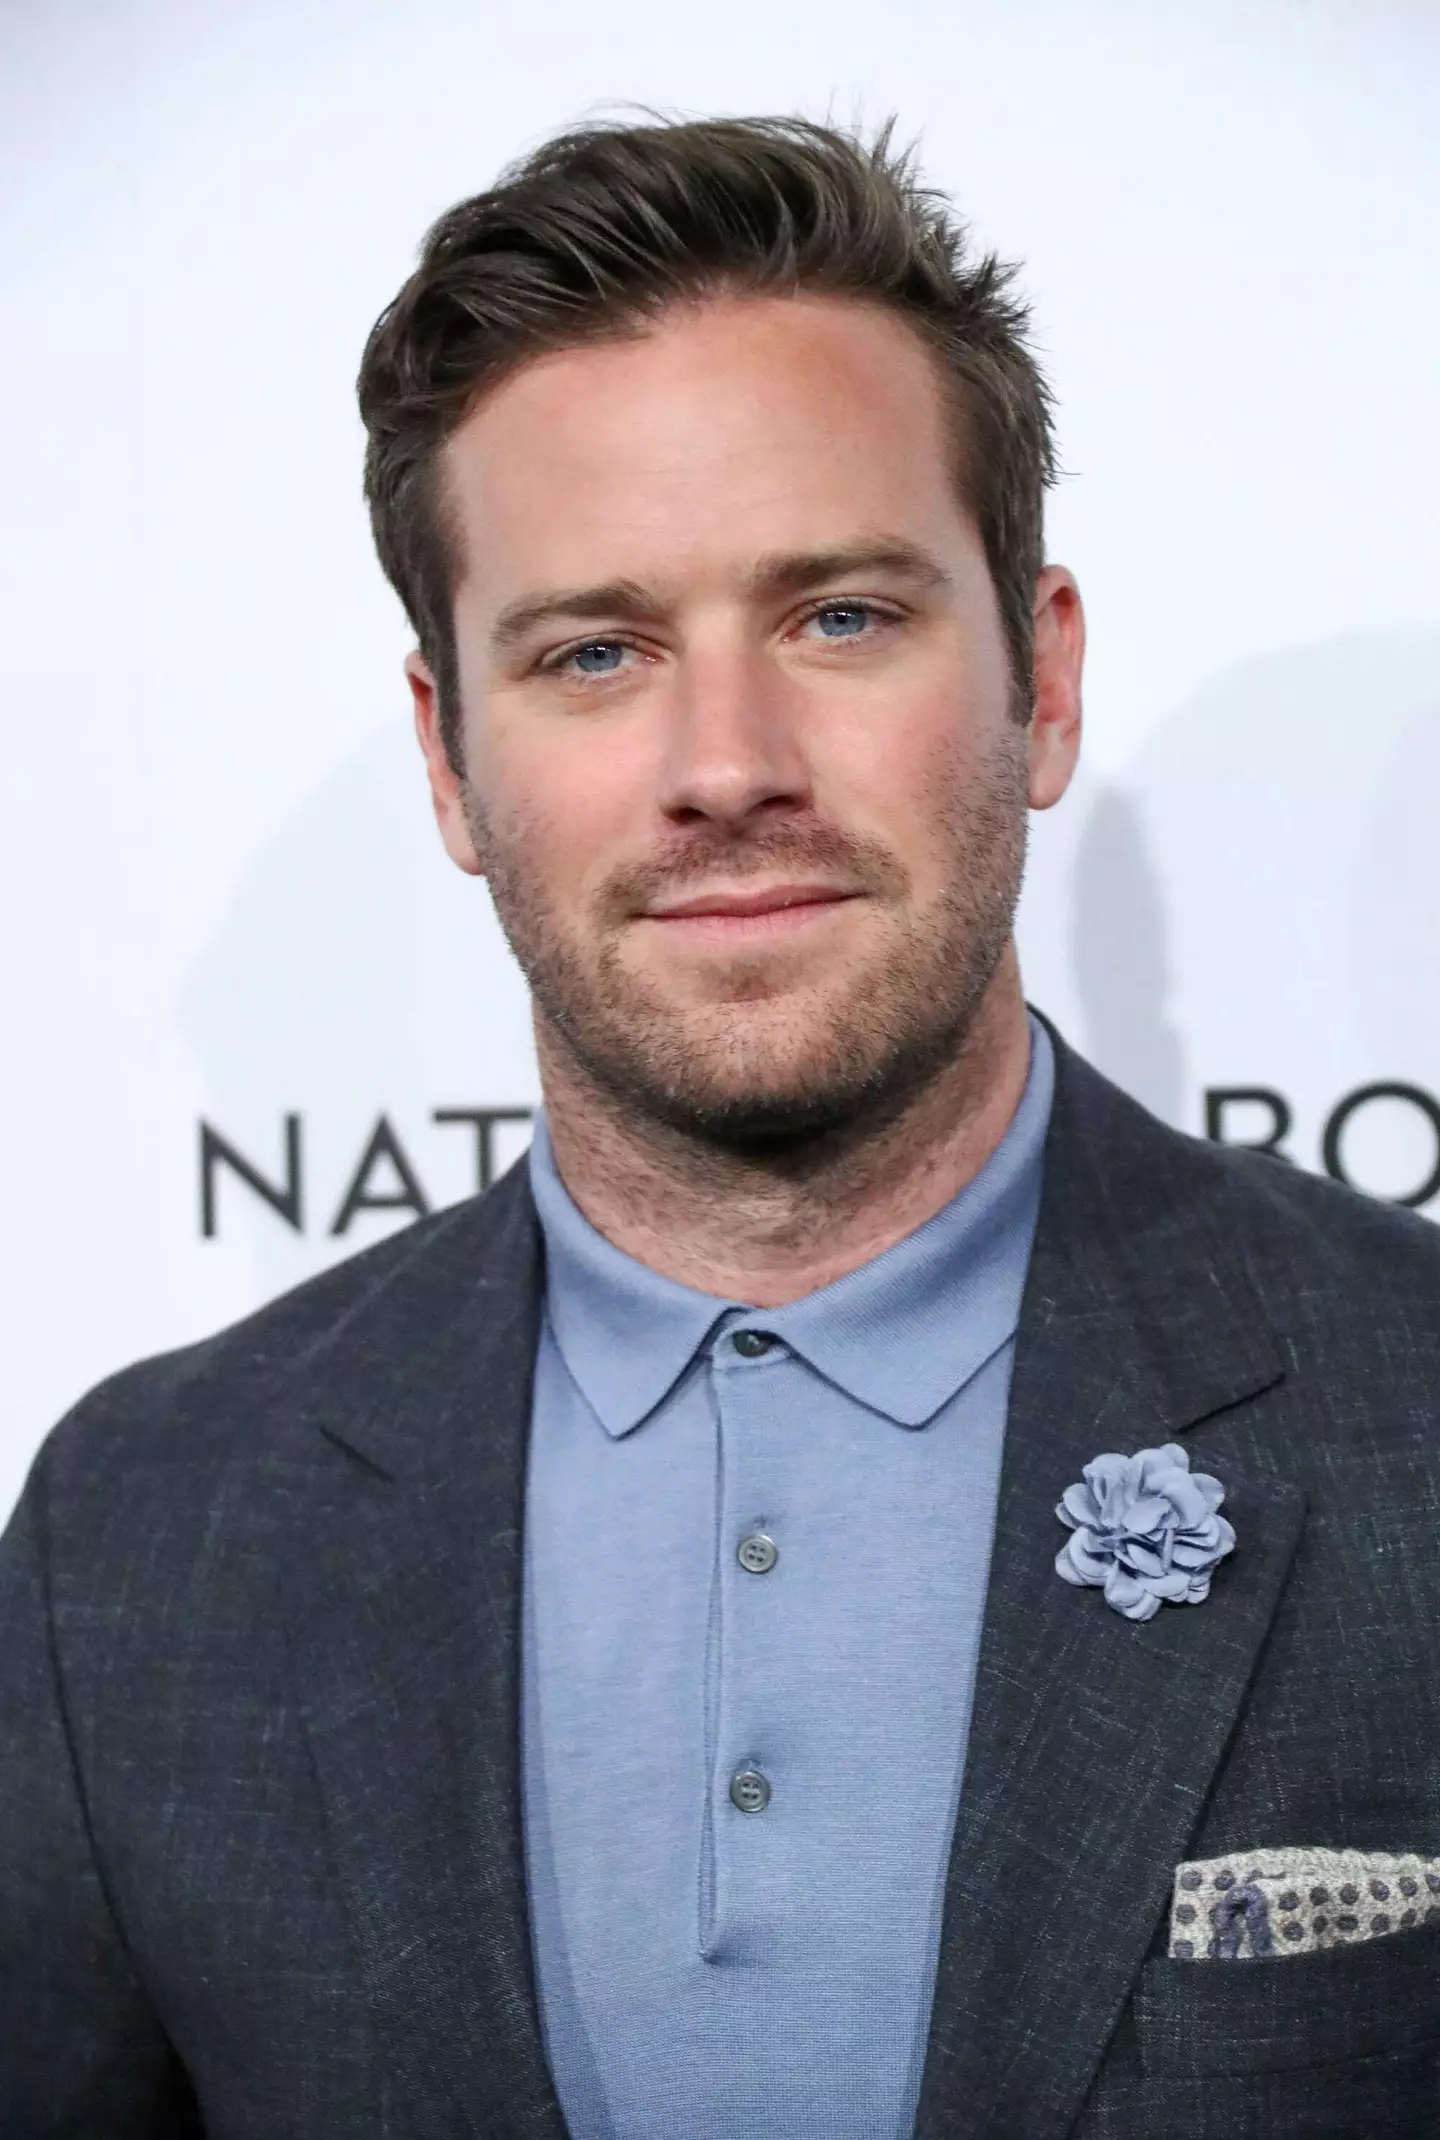 Armie had been accused of rape and physical abuse back in 2021.